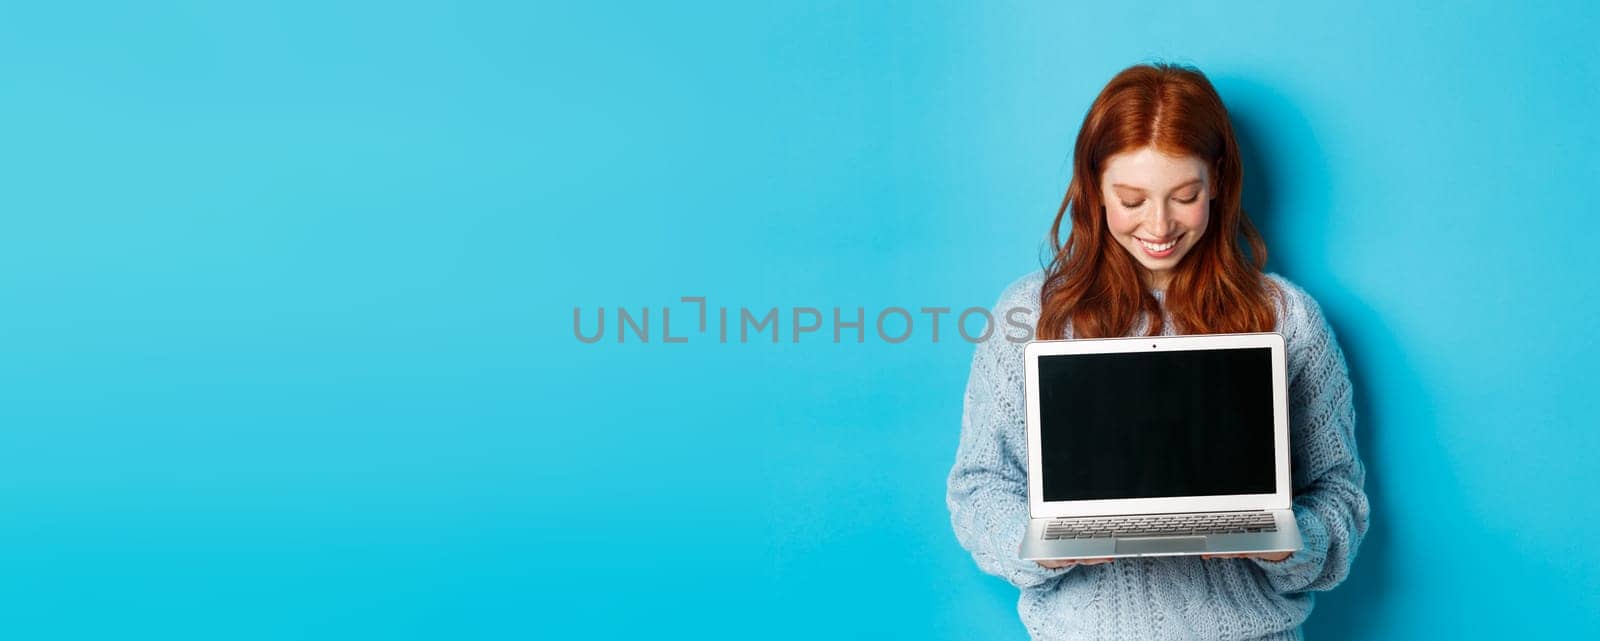 Cute redhead woman in sweater, showing and looking at laptop screen with pleased smile, demonstrating something online, standing over blue background.